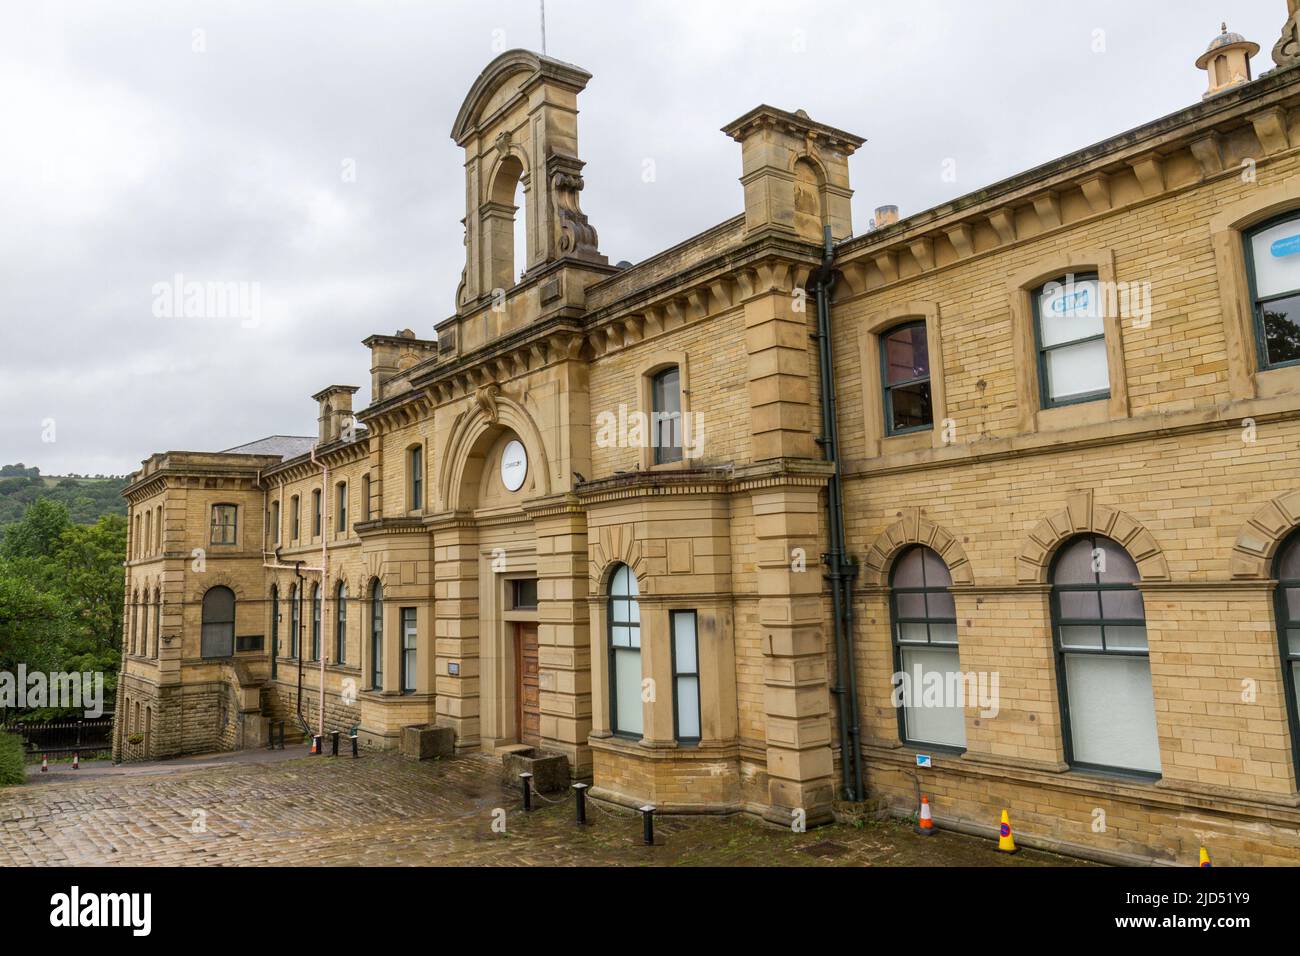 Stunning architecture of Salts Mills, Saltaire, a Victorian model village, Shipley, Bradford, West Yorkshire, England. Stock Photo